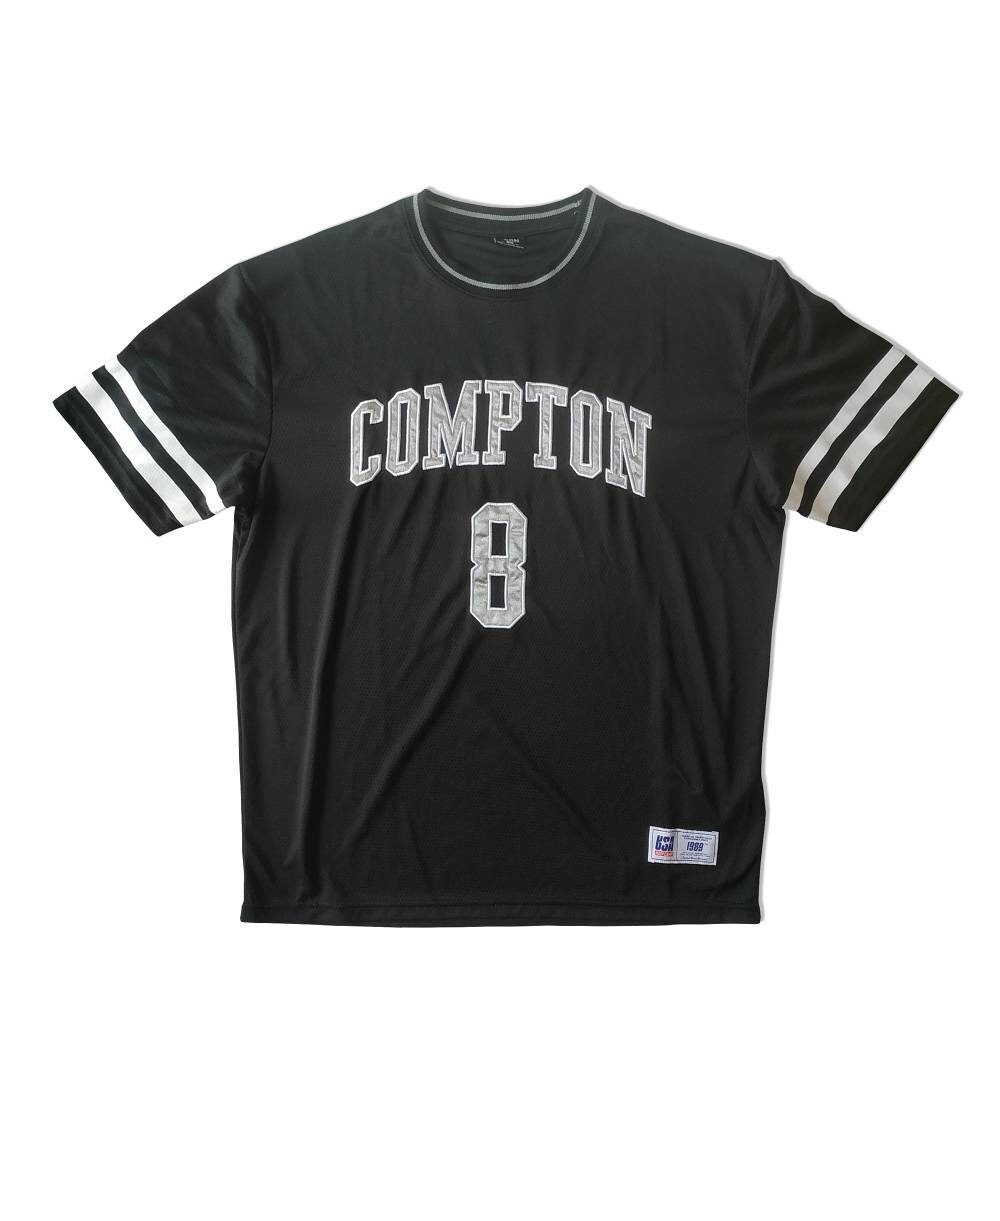 S Vintage T-shirt Outdoors Black Compton Camp - Etsy USA Sportswear Jersey Size FSBN 8 Nr Polyester Basketball Hoop